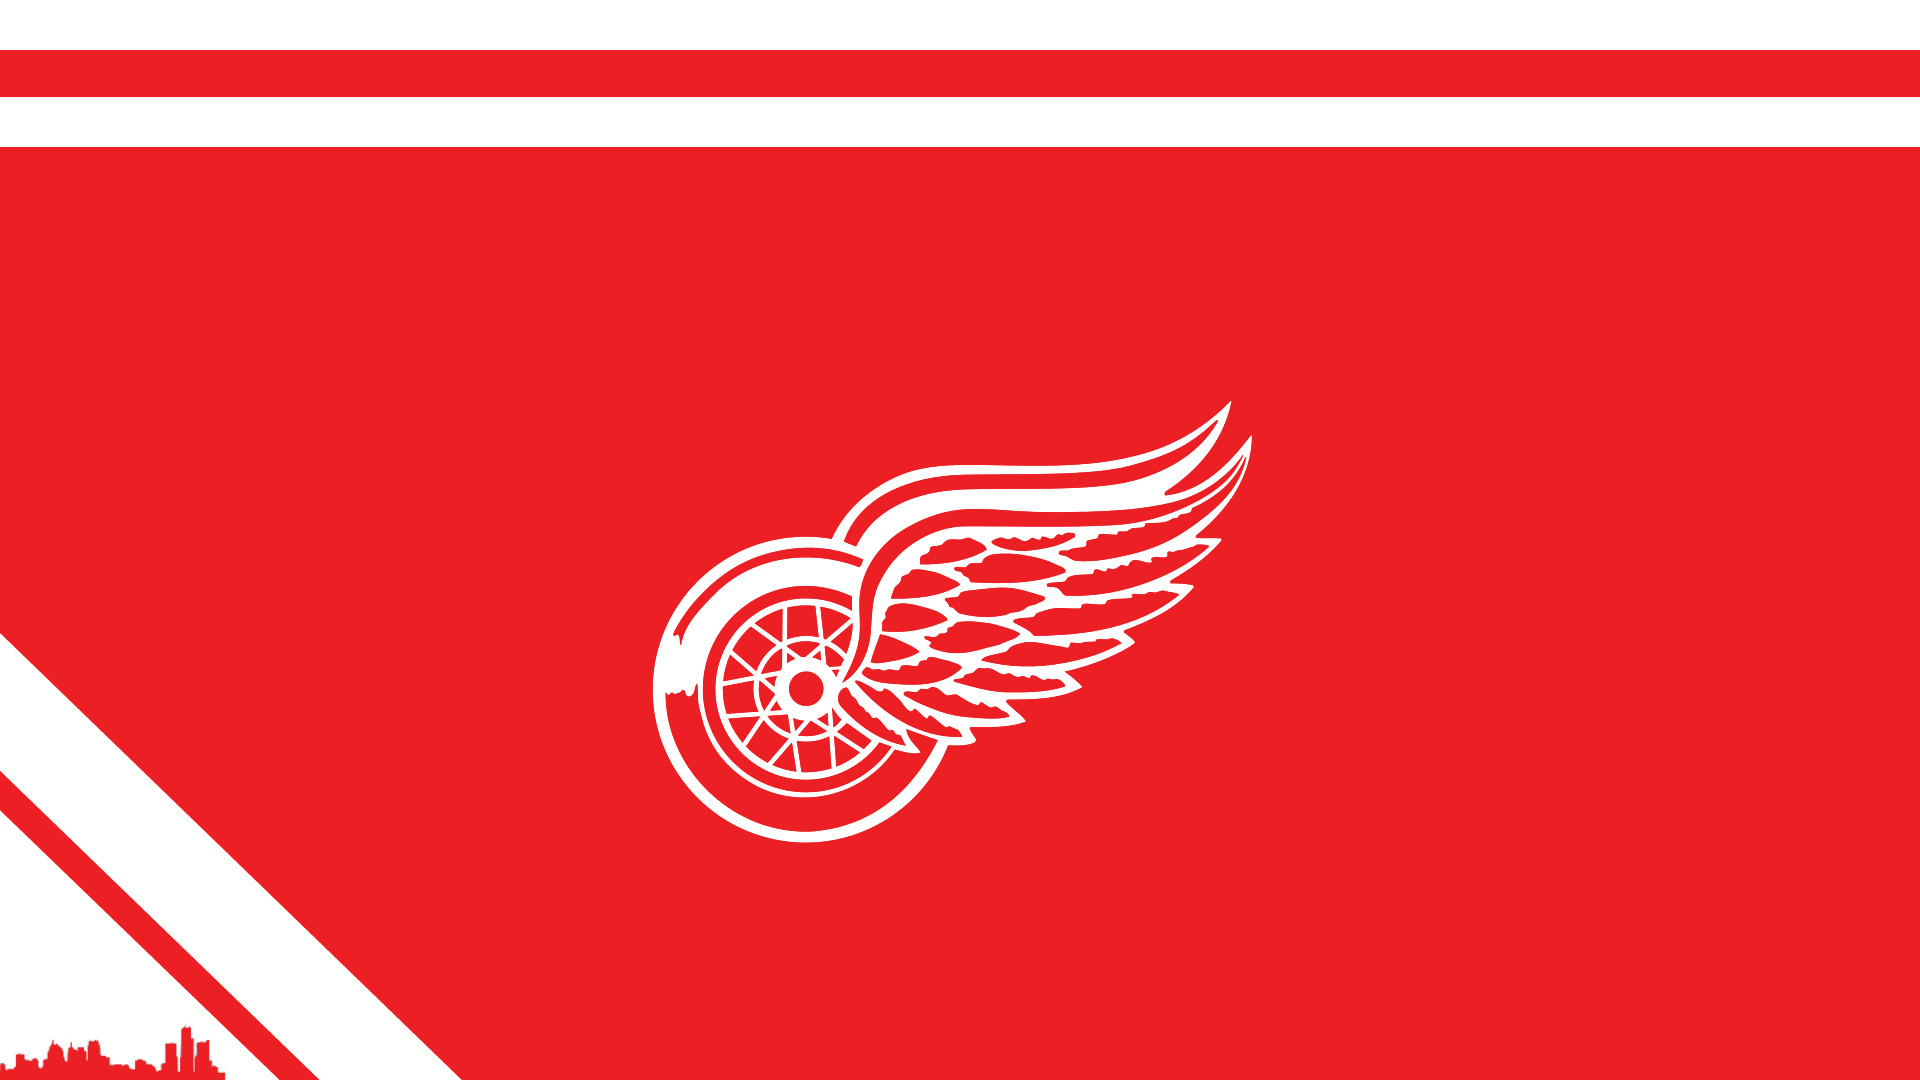 Detroit Red Wings: The team officially began playing at the Joe Louis Arena during the 1979–80 season. 1920x1080 Full HD Background.